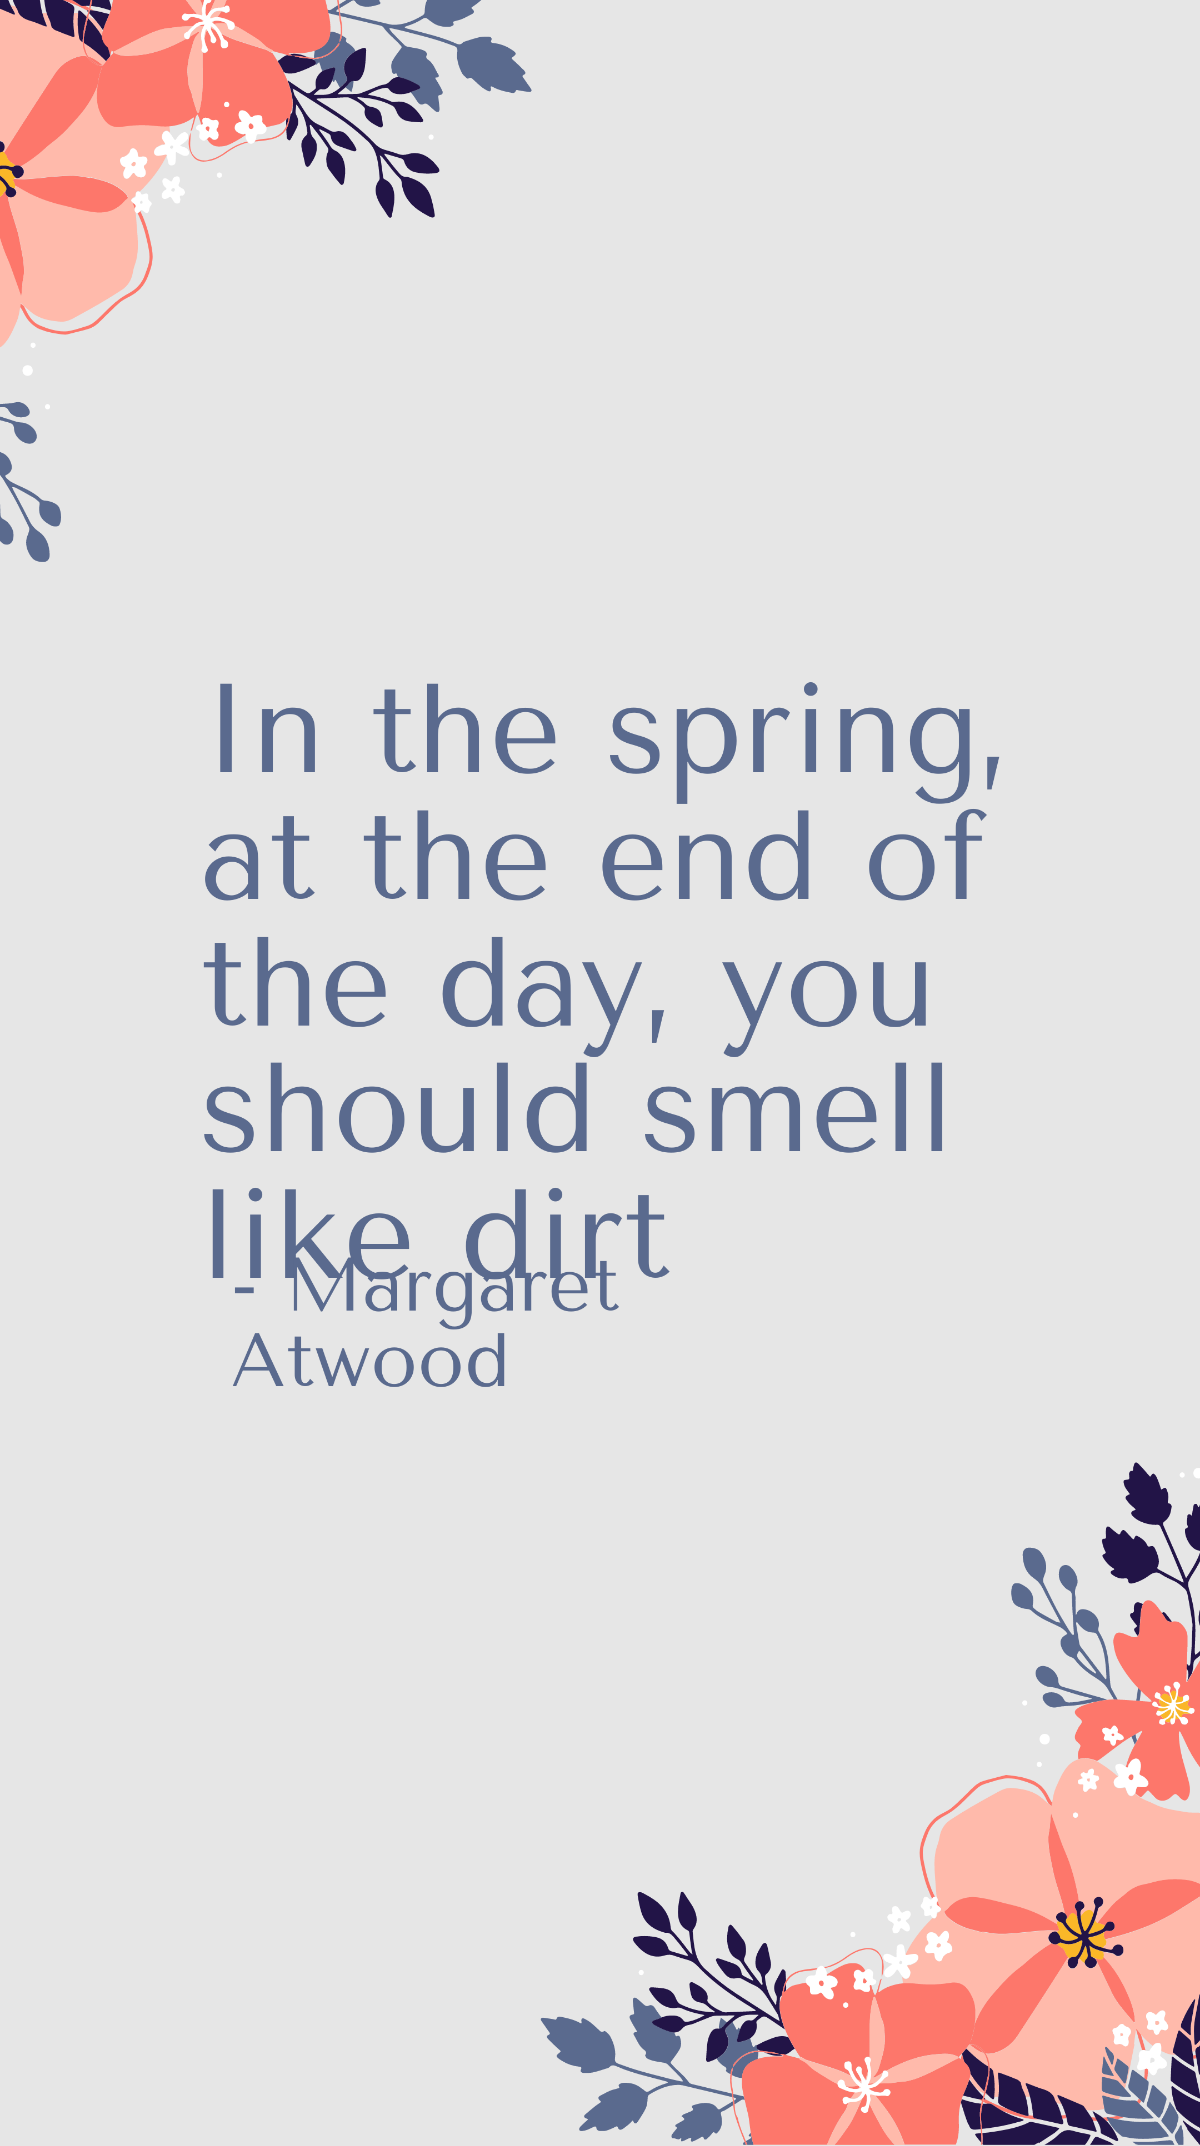 Margaret Atwood - In the spring, at the end of the day, you should smell like dirt Template